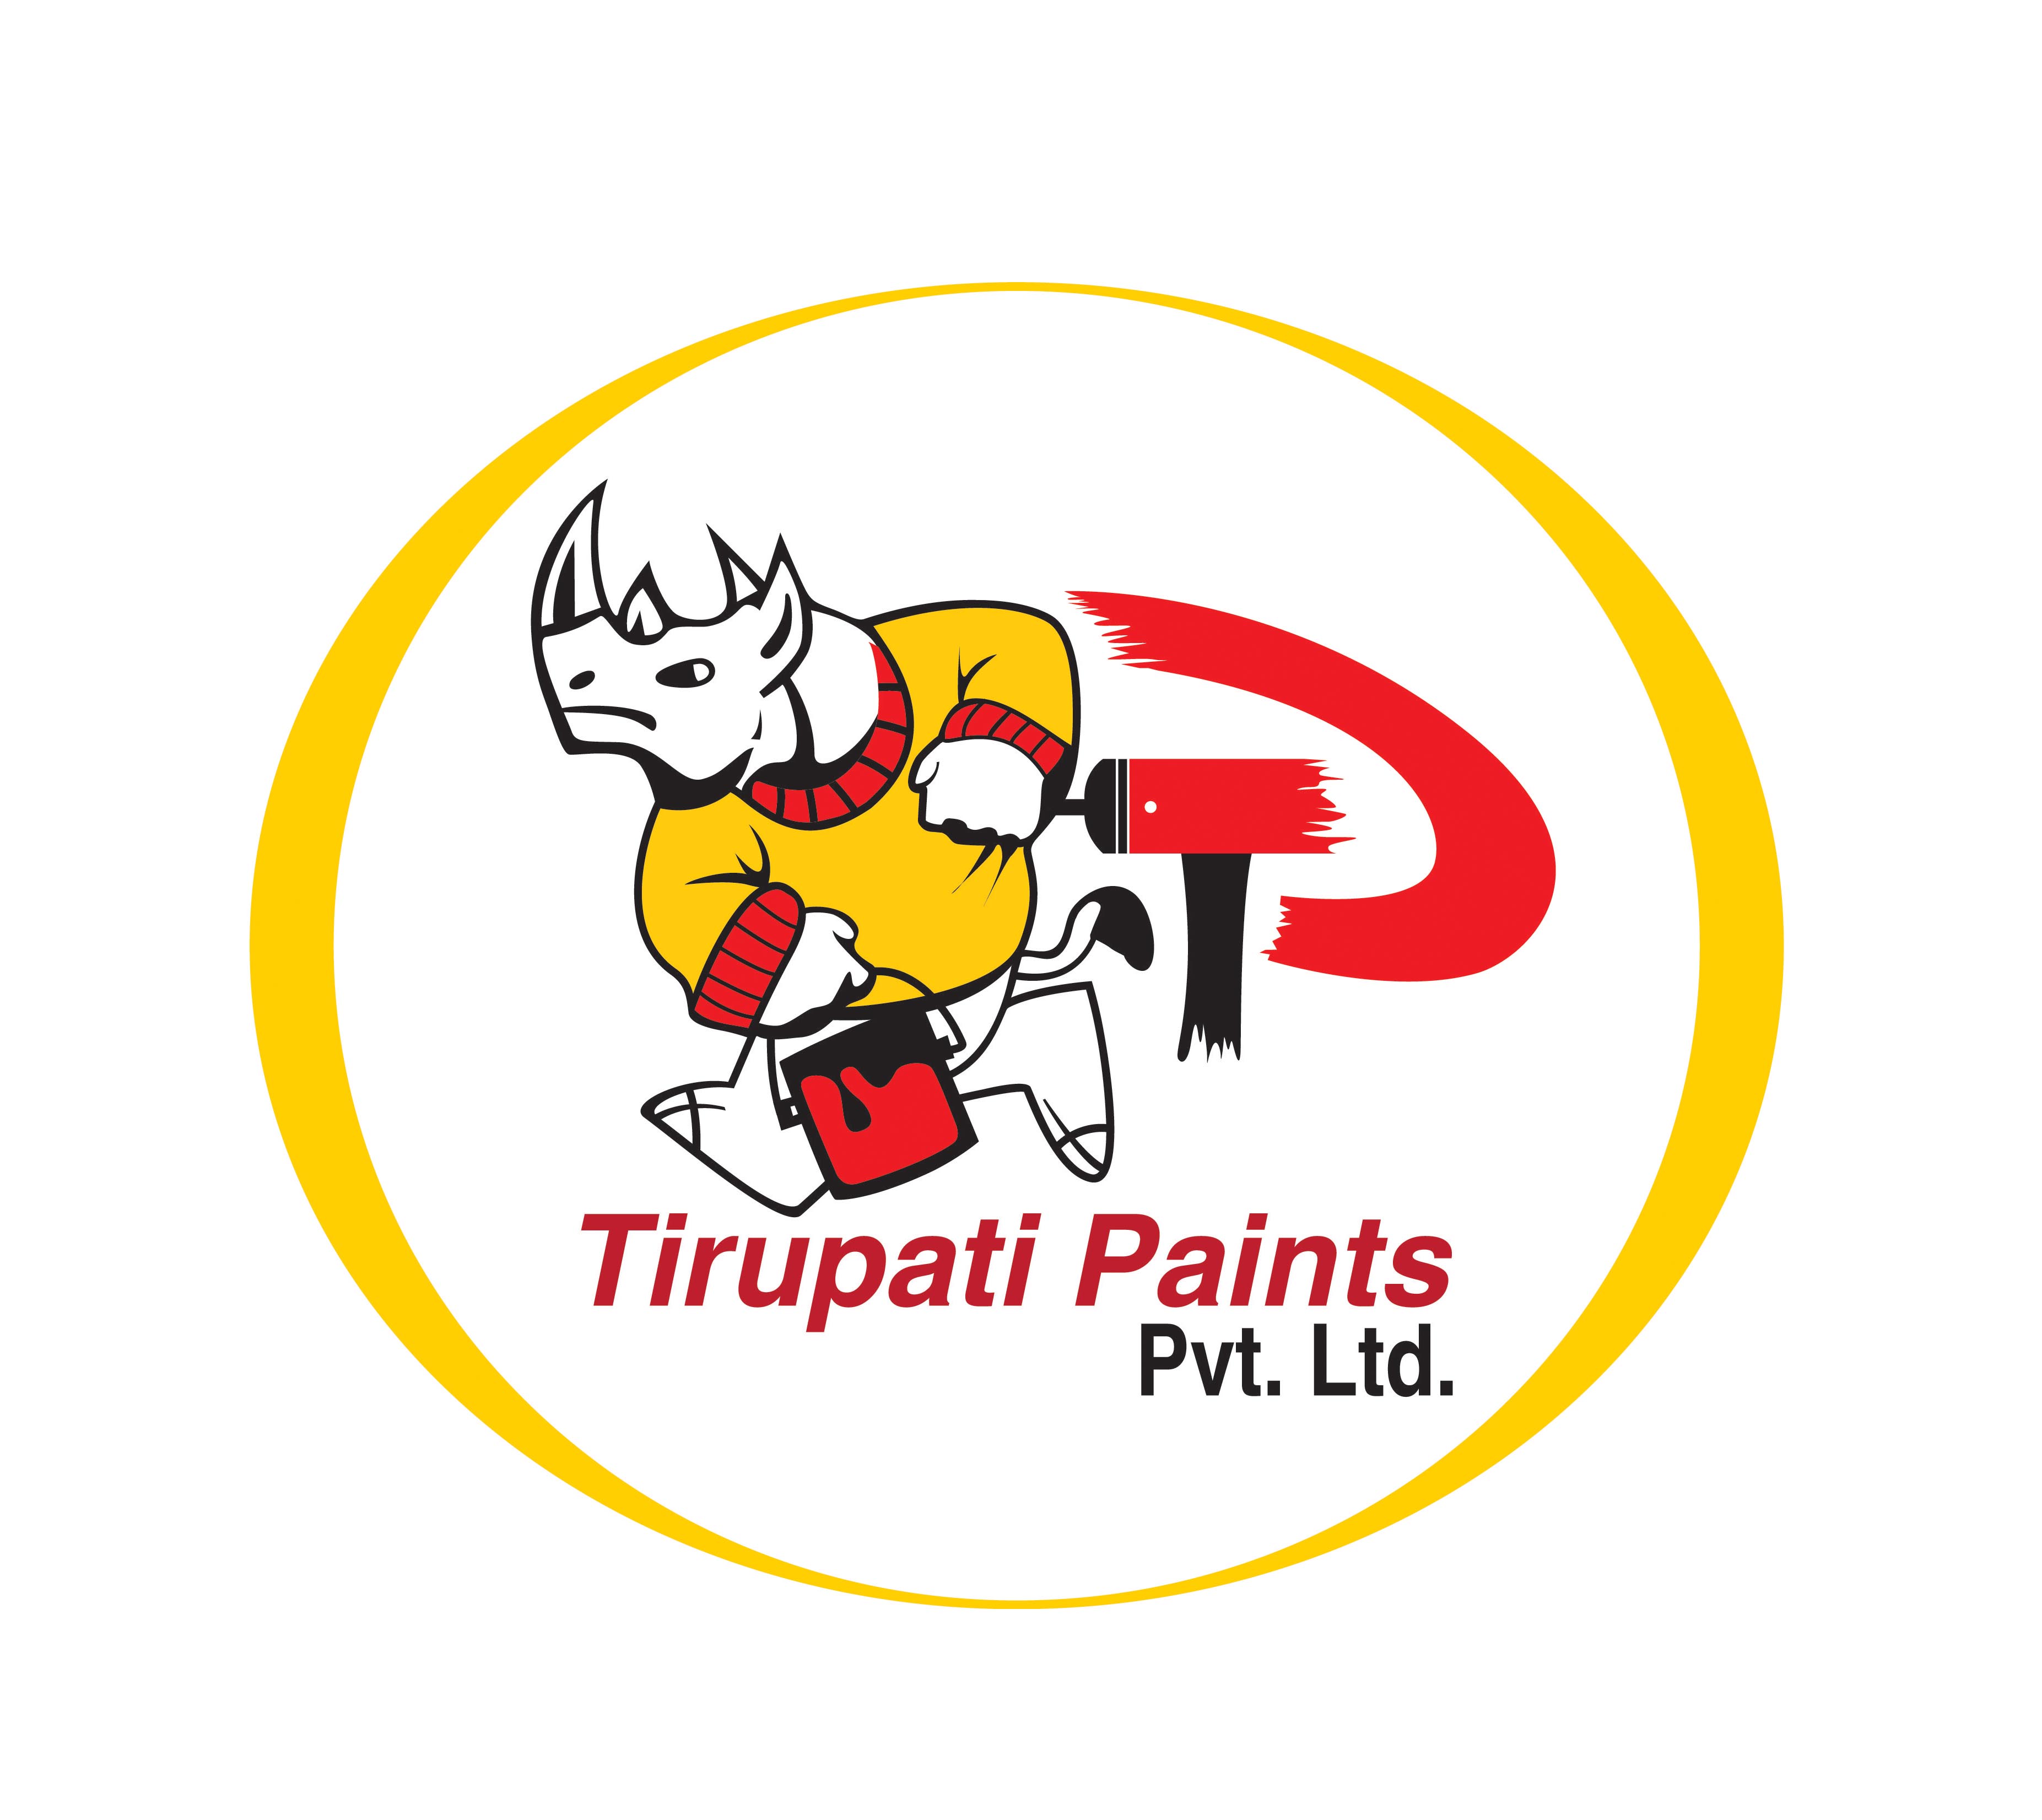 Tirupati Paints :: The Paints of Nepal - Best Paint Company & Color Manufacturing Company in Nepal